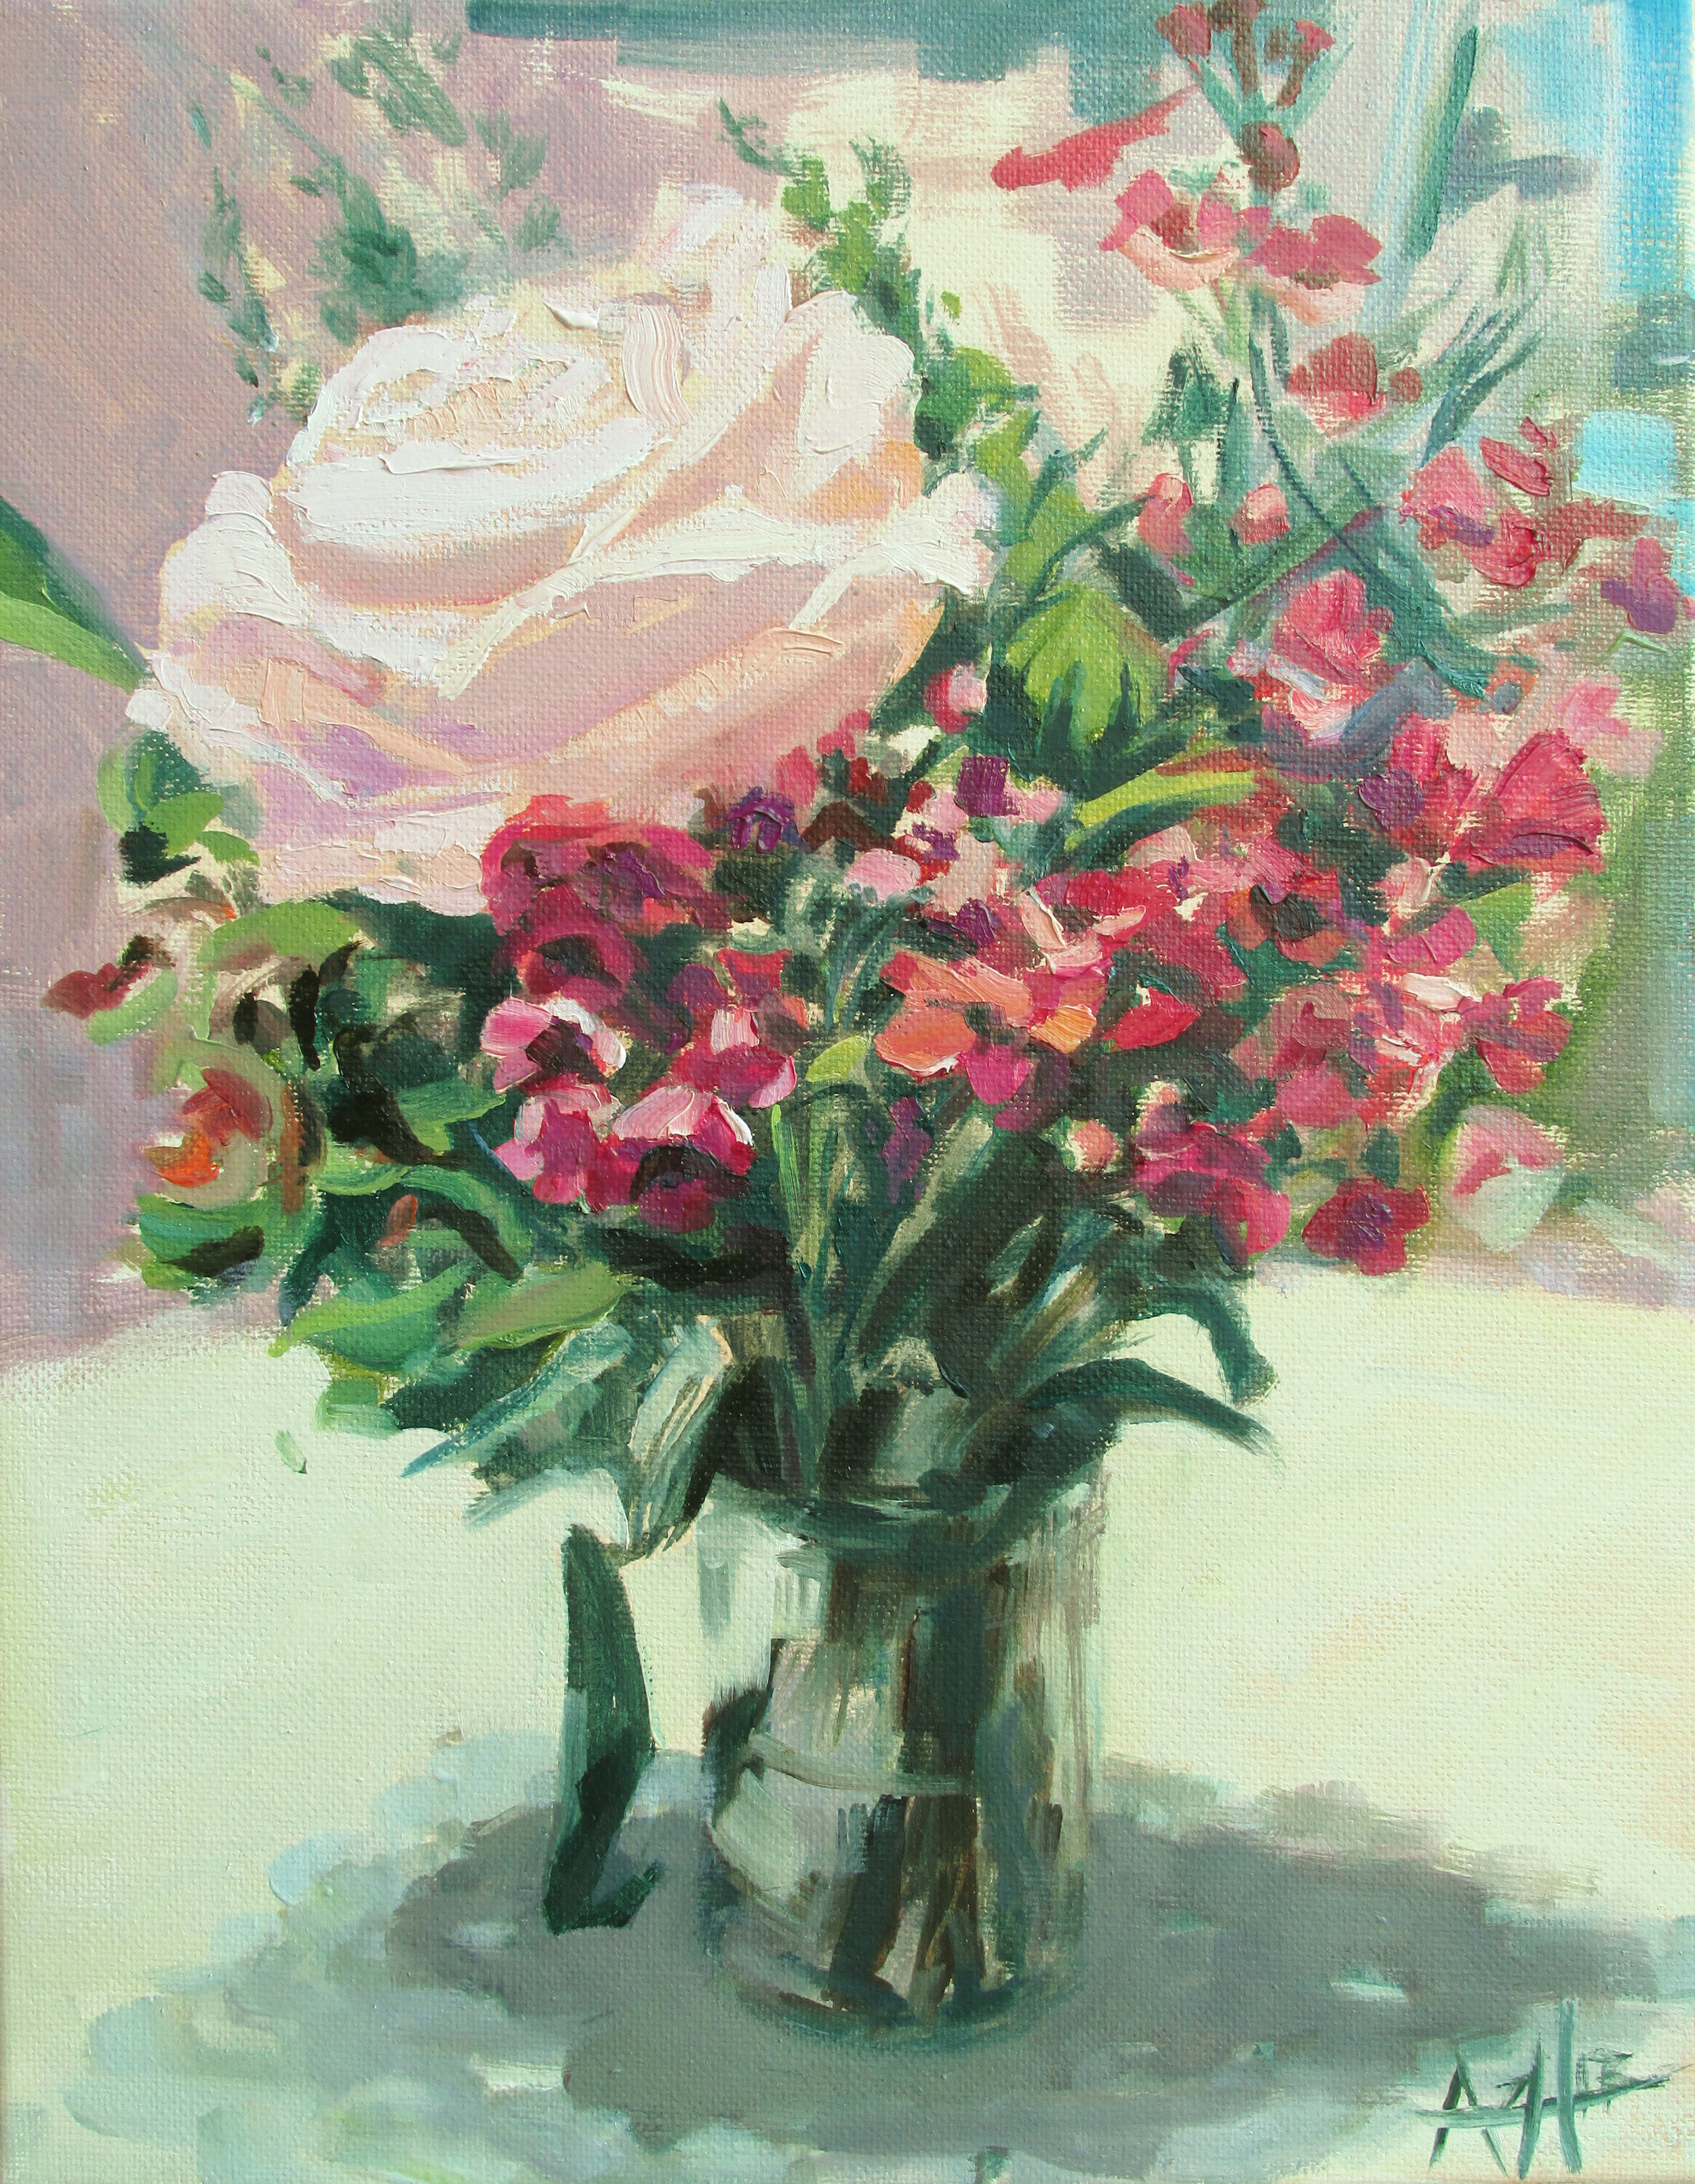 SOLD, Rose in a London Cafe, Copyright 2014 Hirschten, Oil on Canvas 11" x 14"